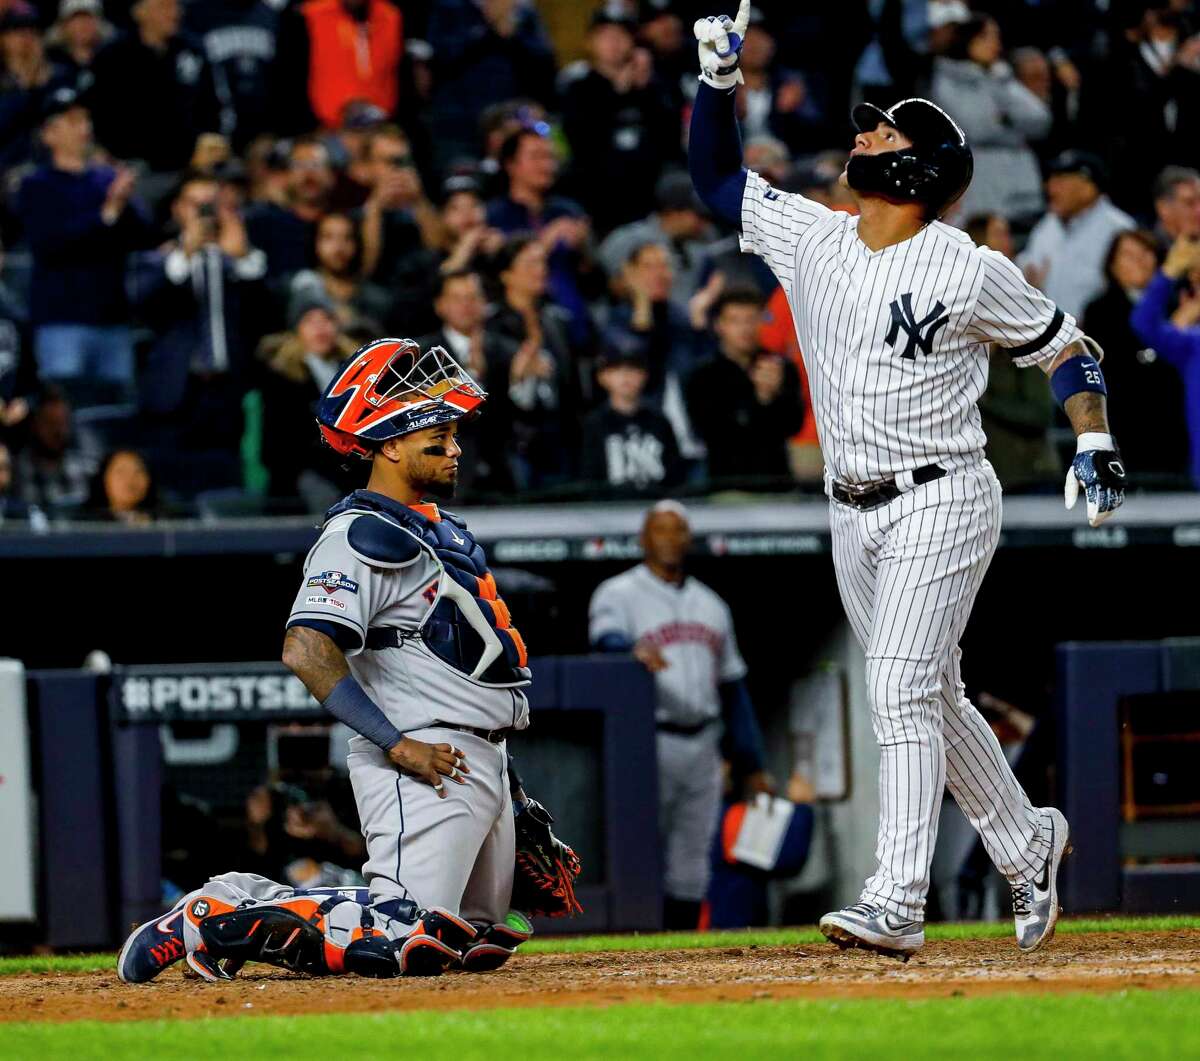 Houston Astros catcher Martin Maldonado (12) watches as New York Yankees second baseman Gleyber Torres (25) crosses home plate after hitting a solo home run during the eighth inning of Game 3 of the American League Championship Series at Yankee Stadium in New York on Tuesday, Oct. 15, 2019.